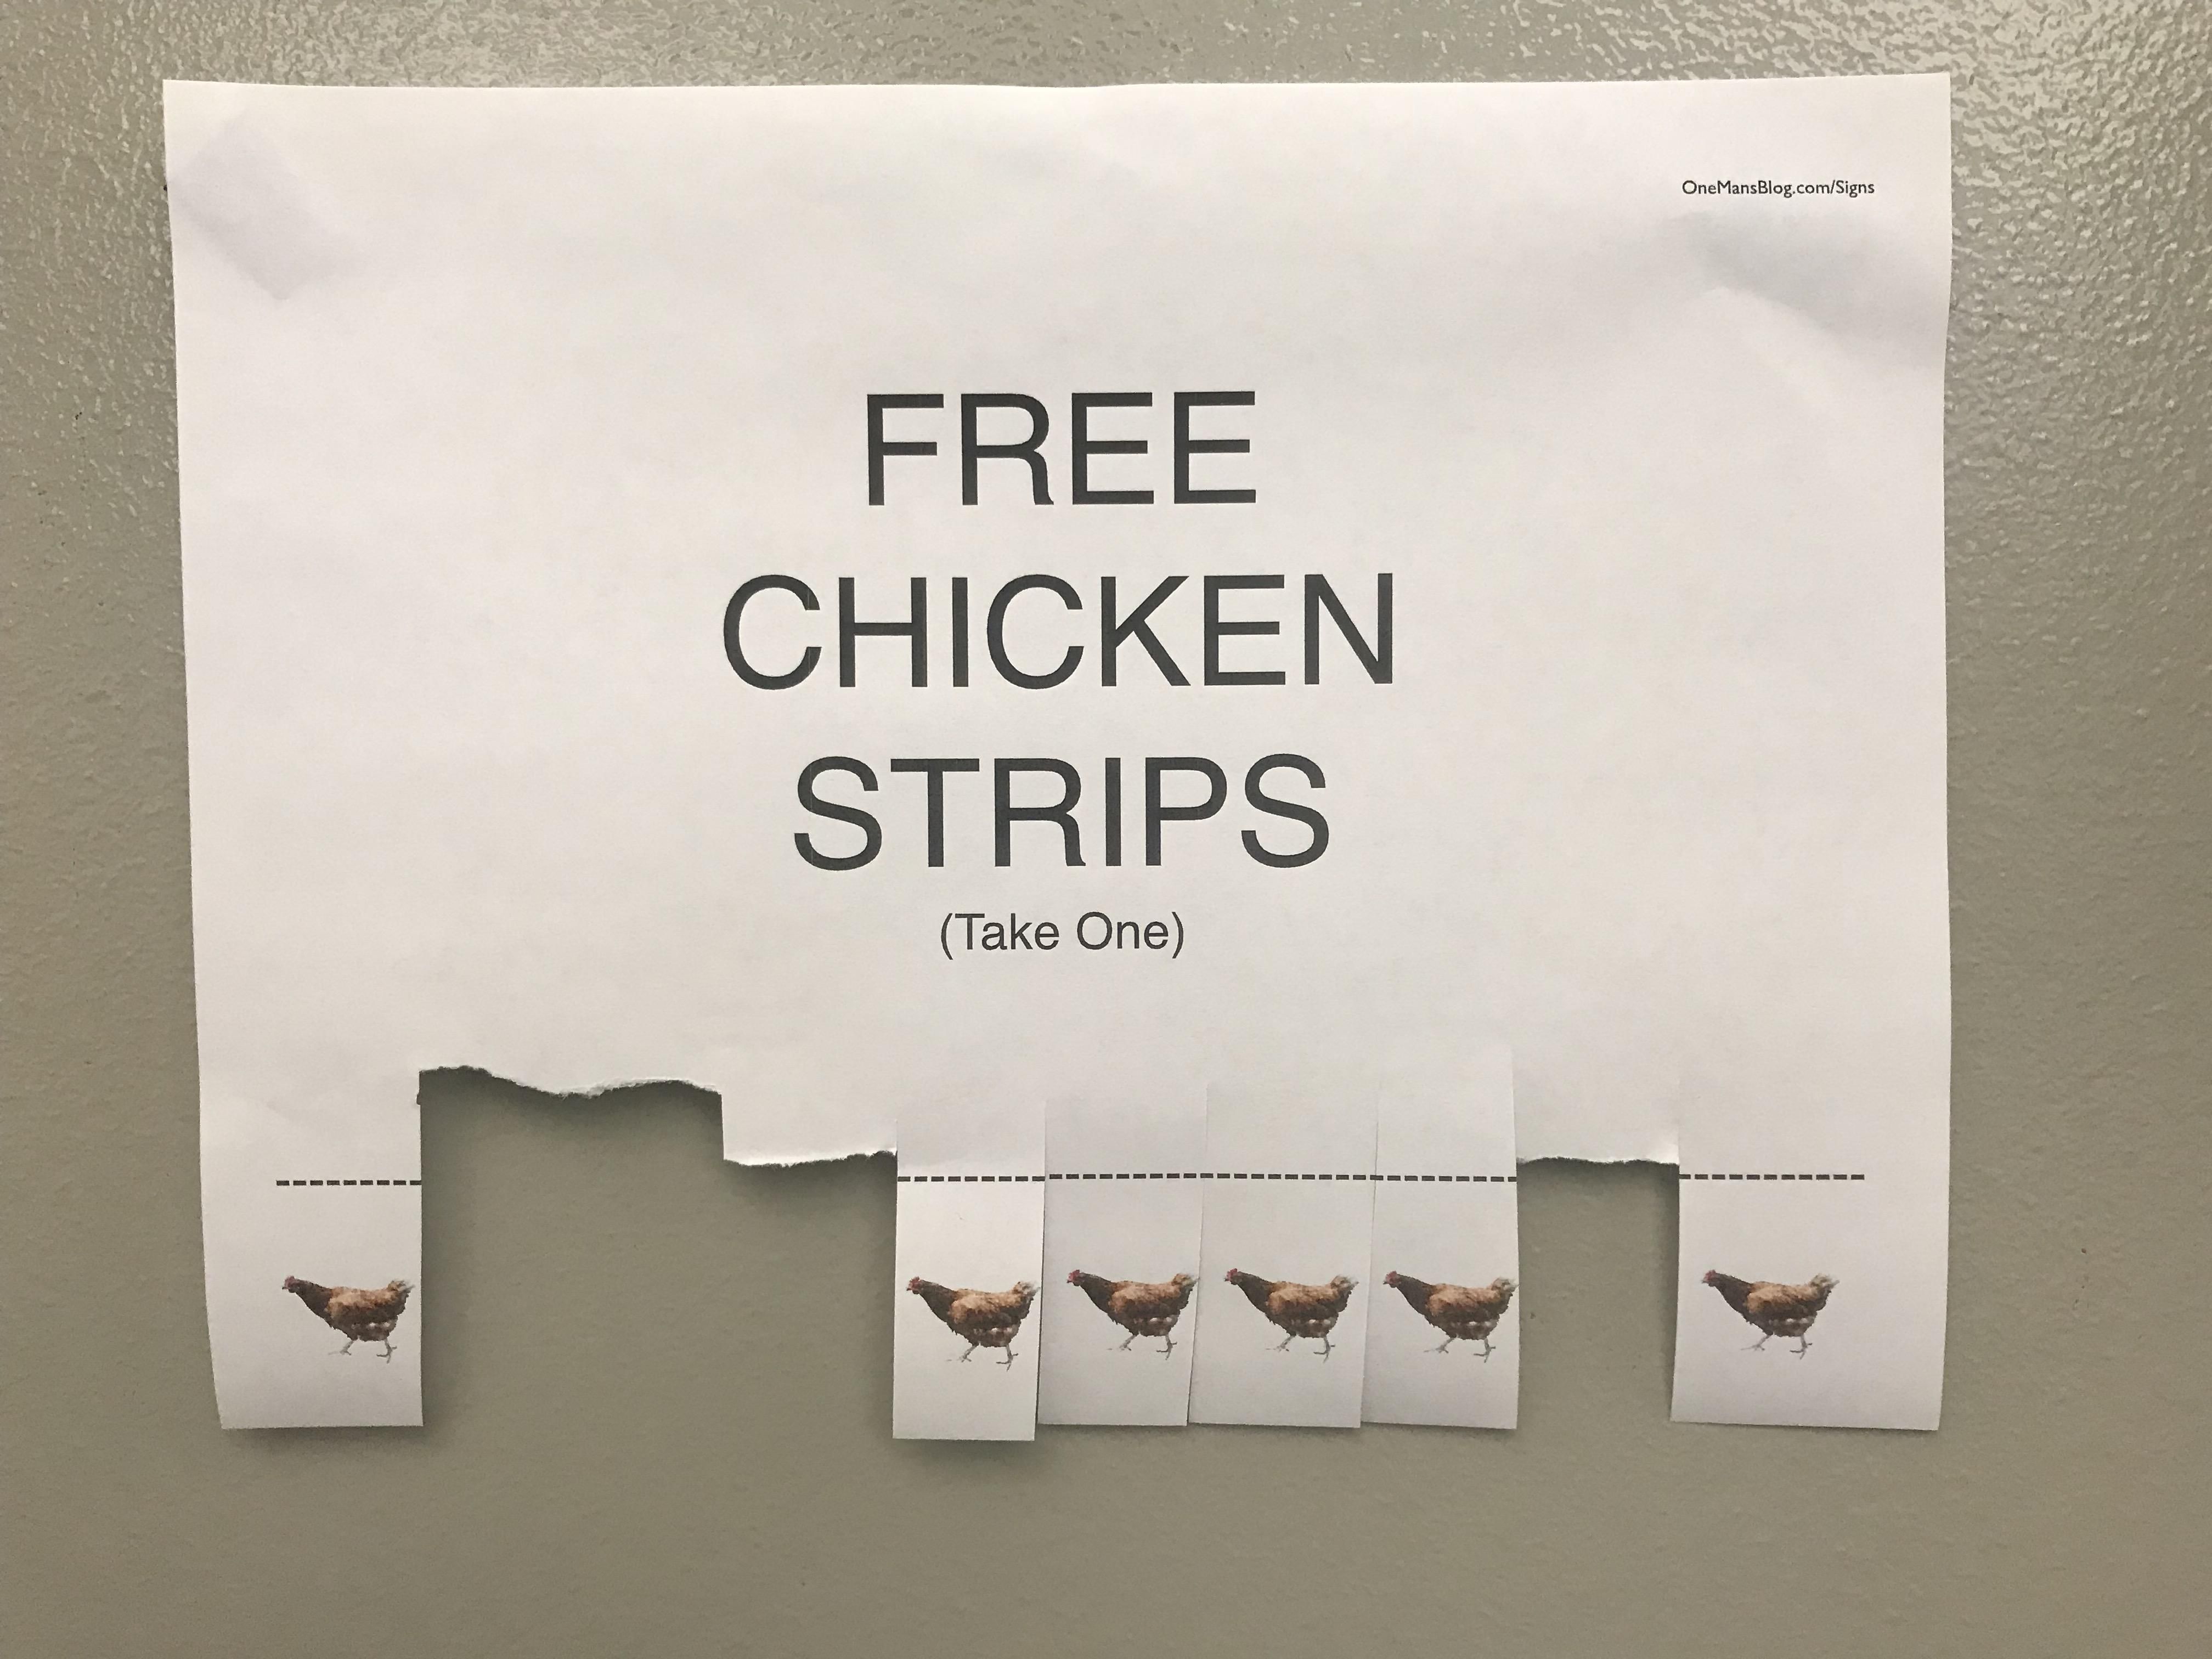 Free, and low-calorie too!